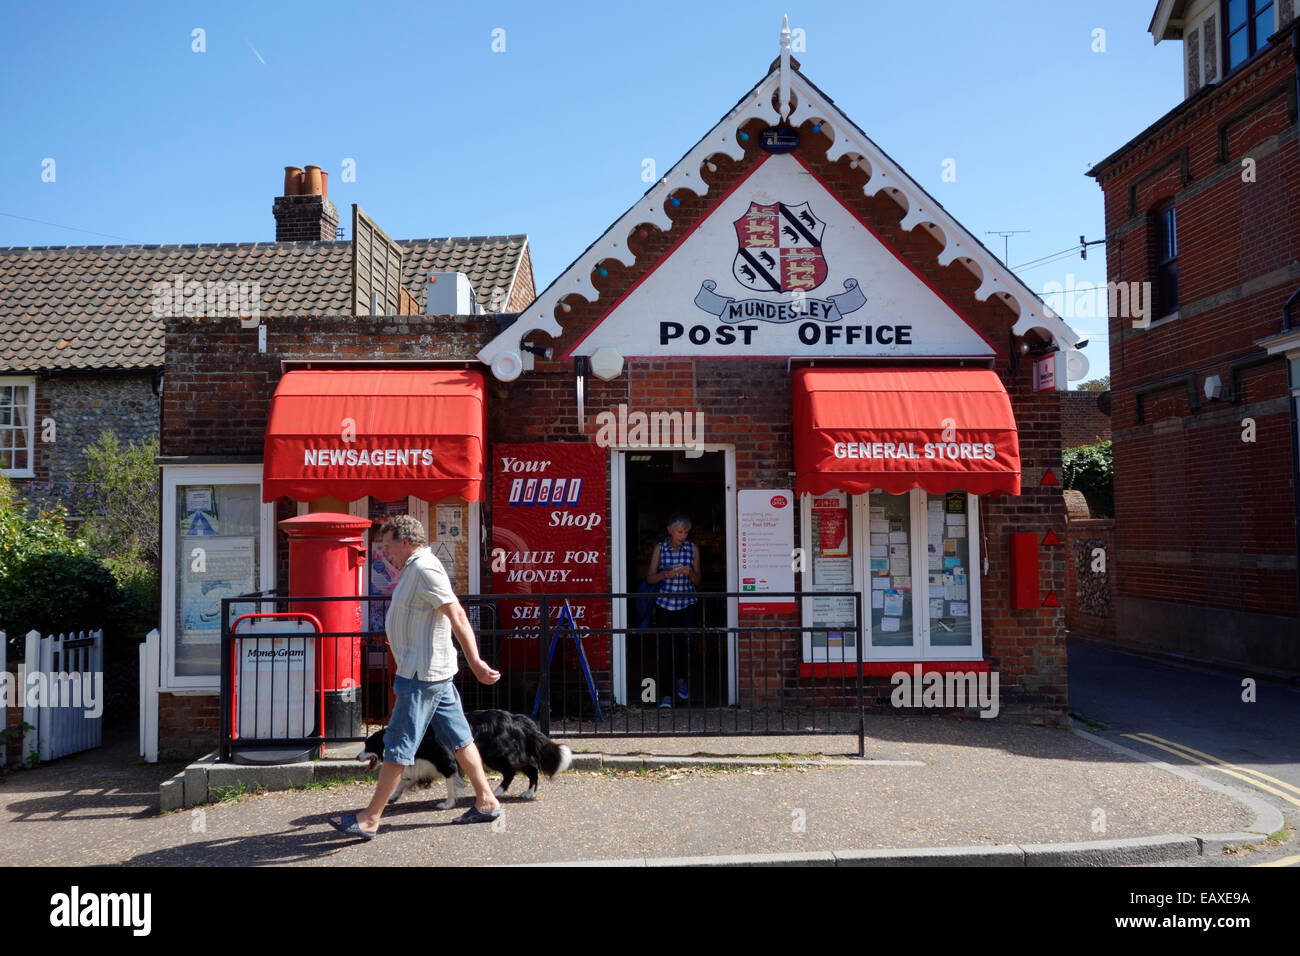 The Post Office at Mundesley, North Norfolk Coast Stock Photo